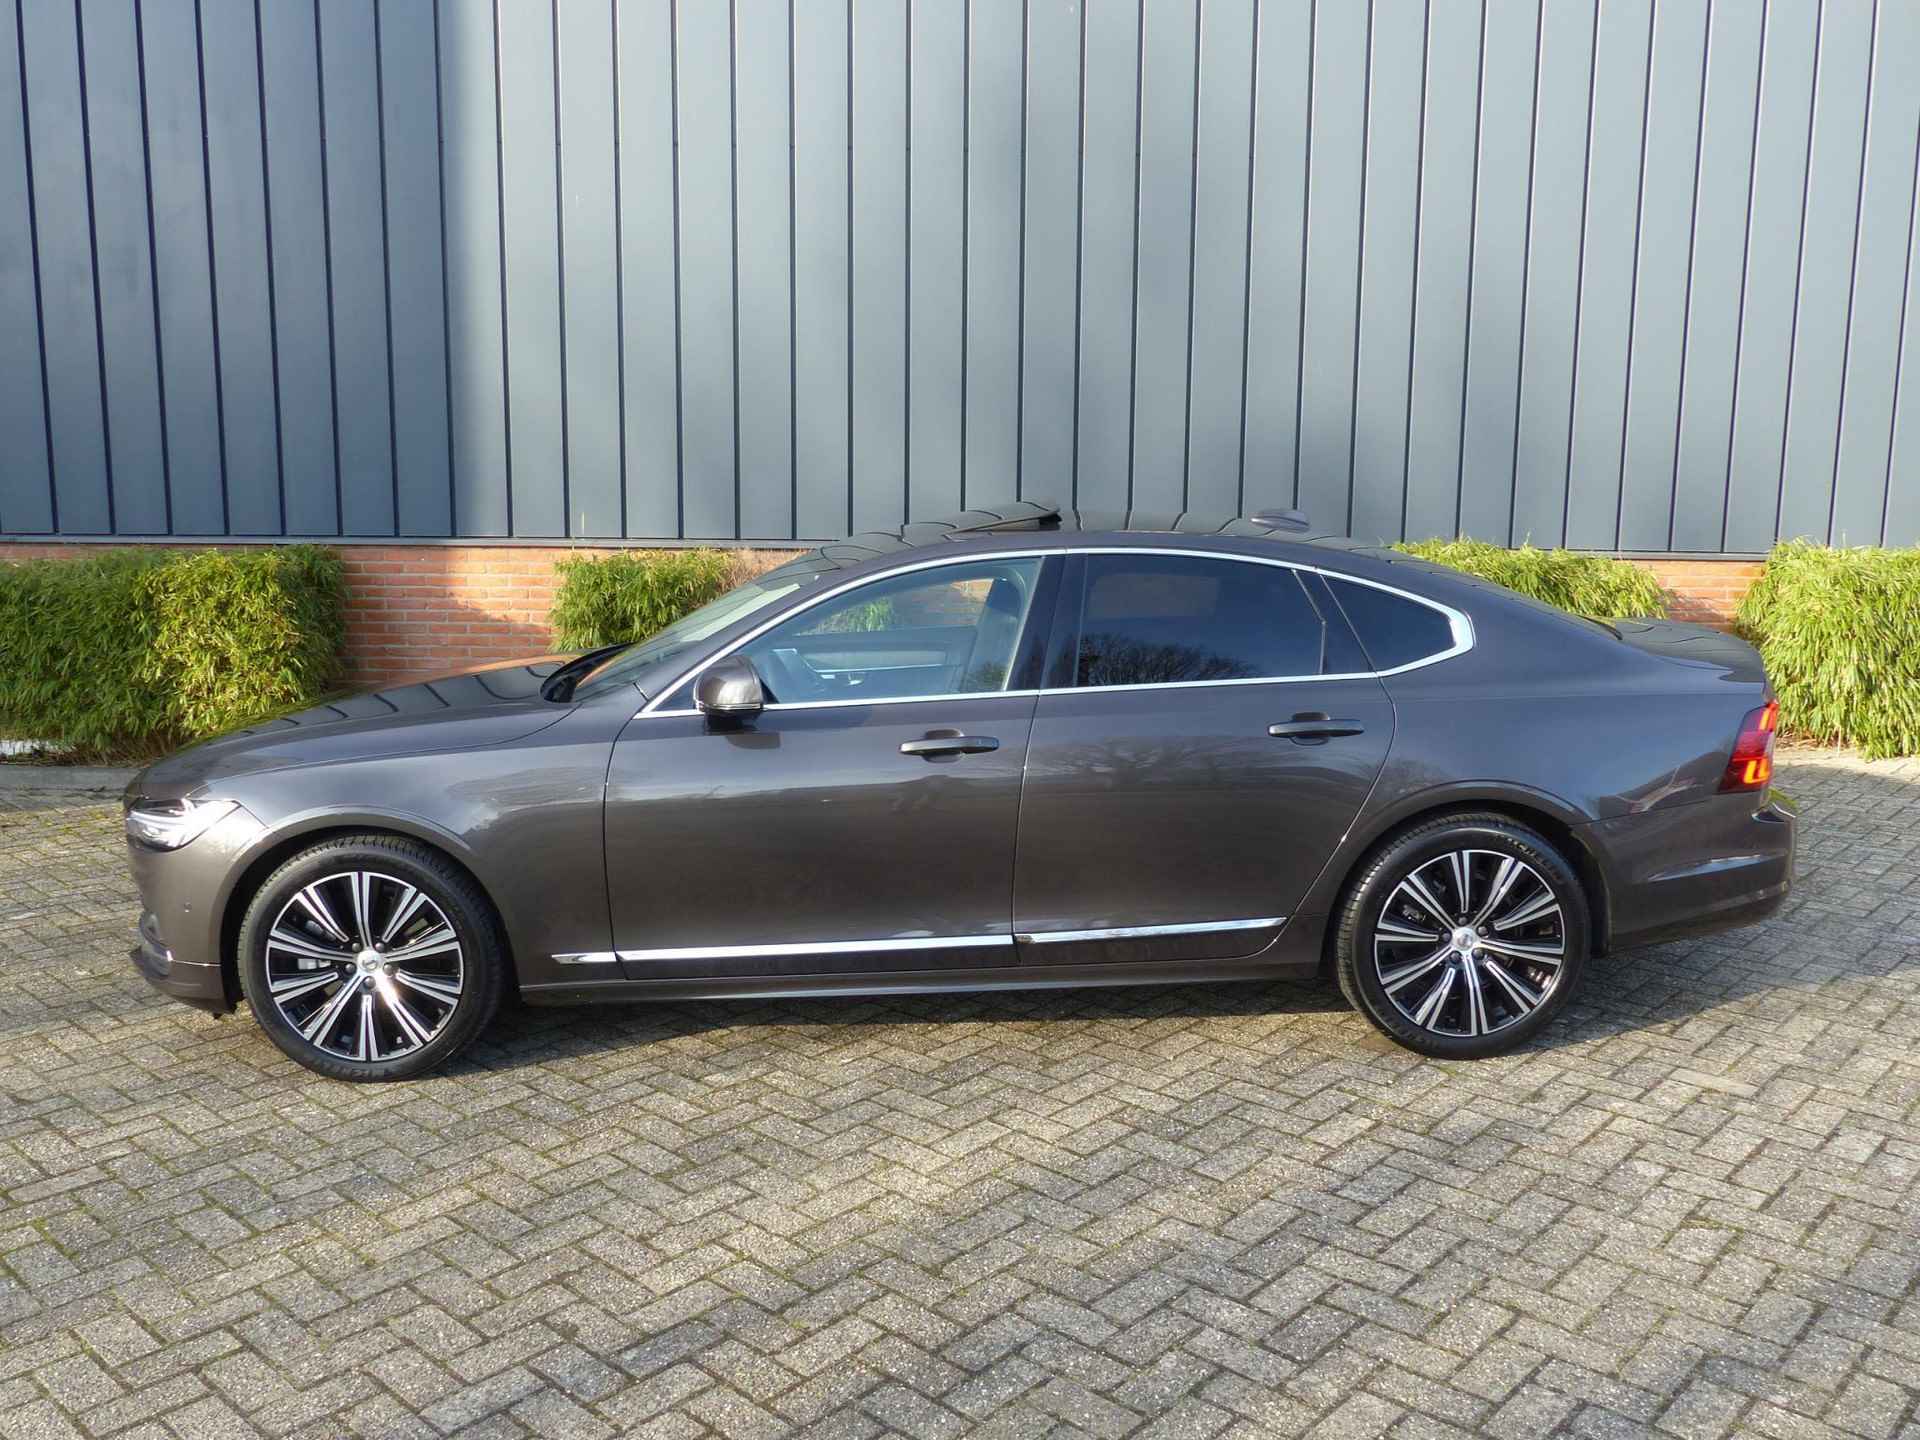 Volvo S90 B5 Ultimate Bright |Luchtvering| Bowers & Wilkins| Nappa Leder| - 3/34